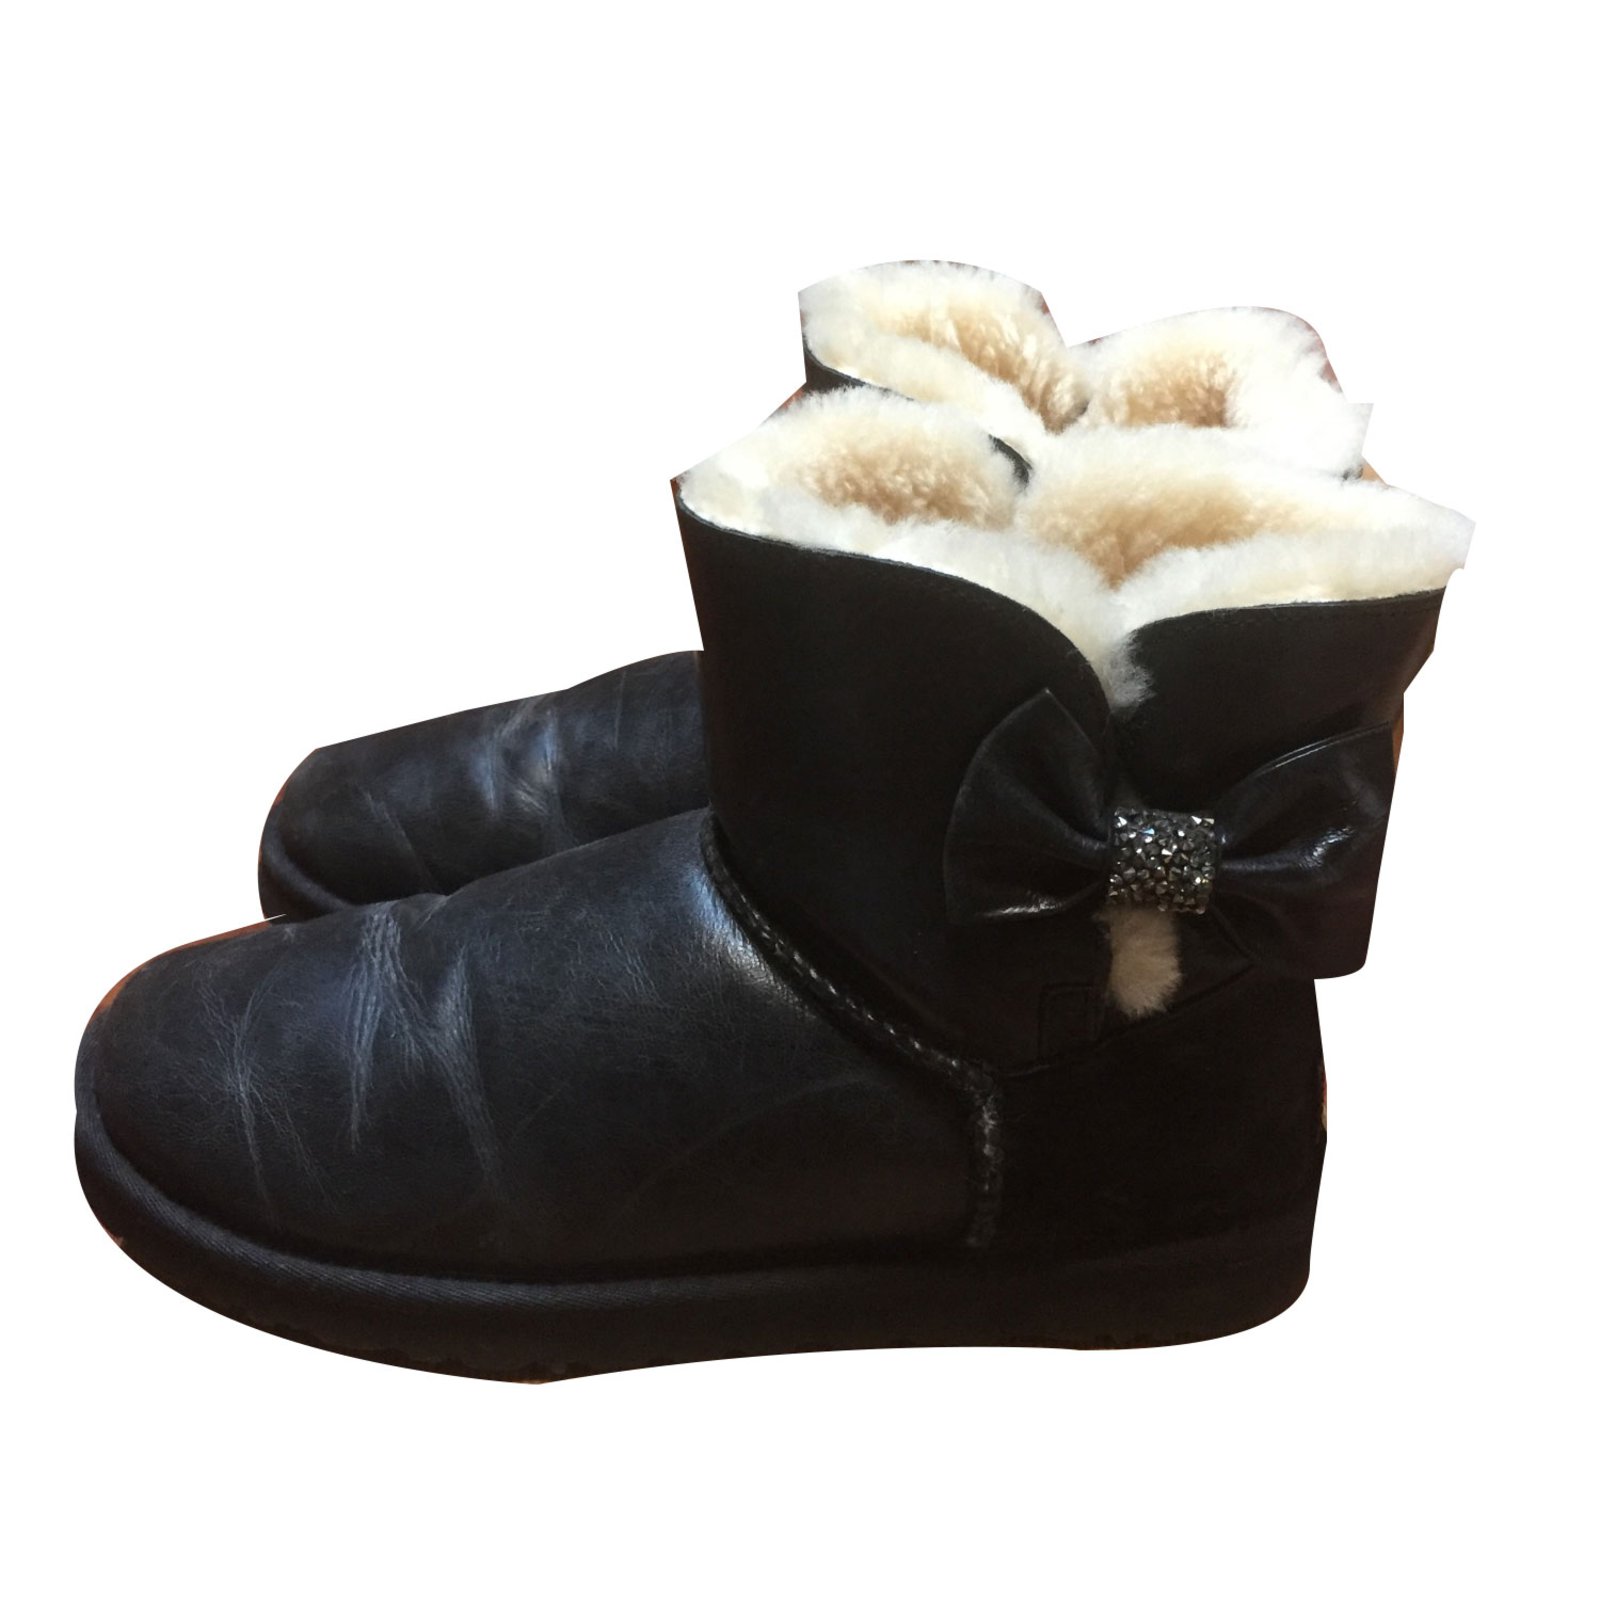 ugg boots leather black